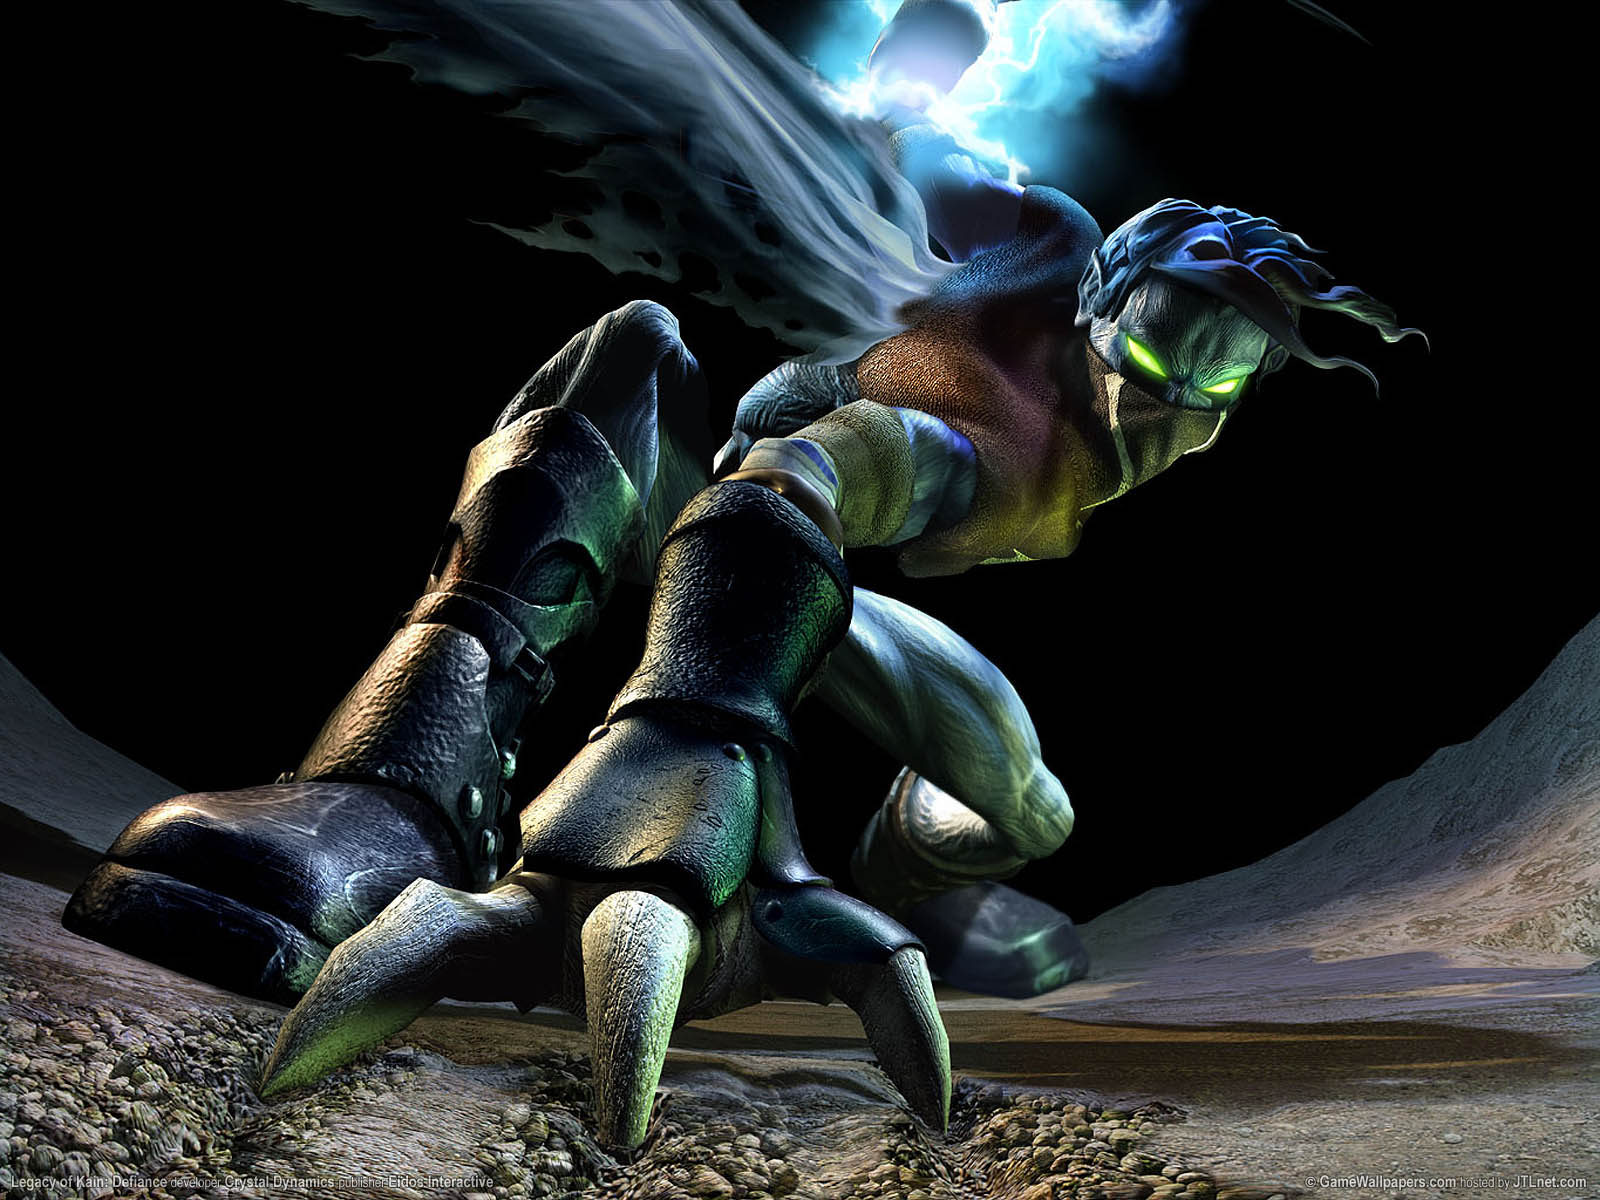 Legacy of Kain%3A Defiance wallpaper 03 1600x1200